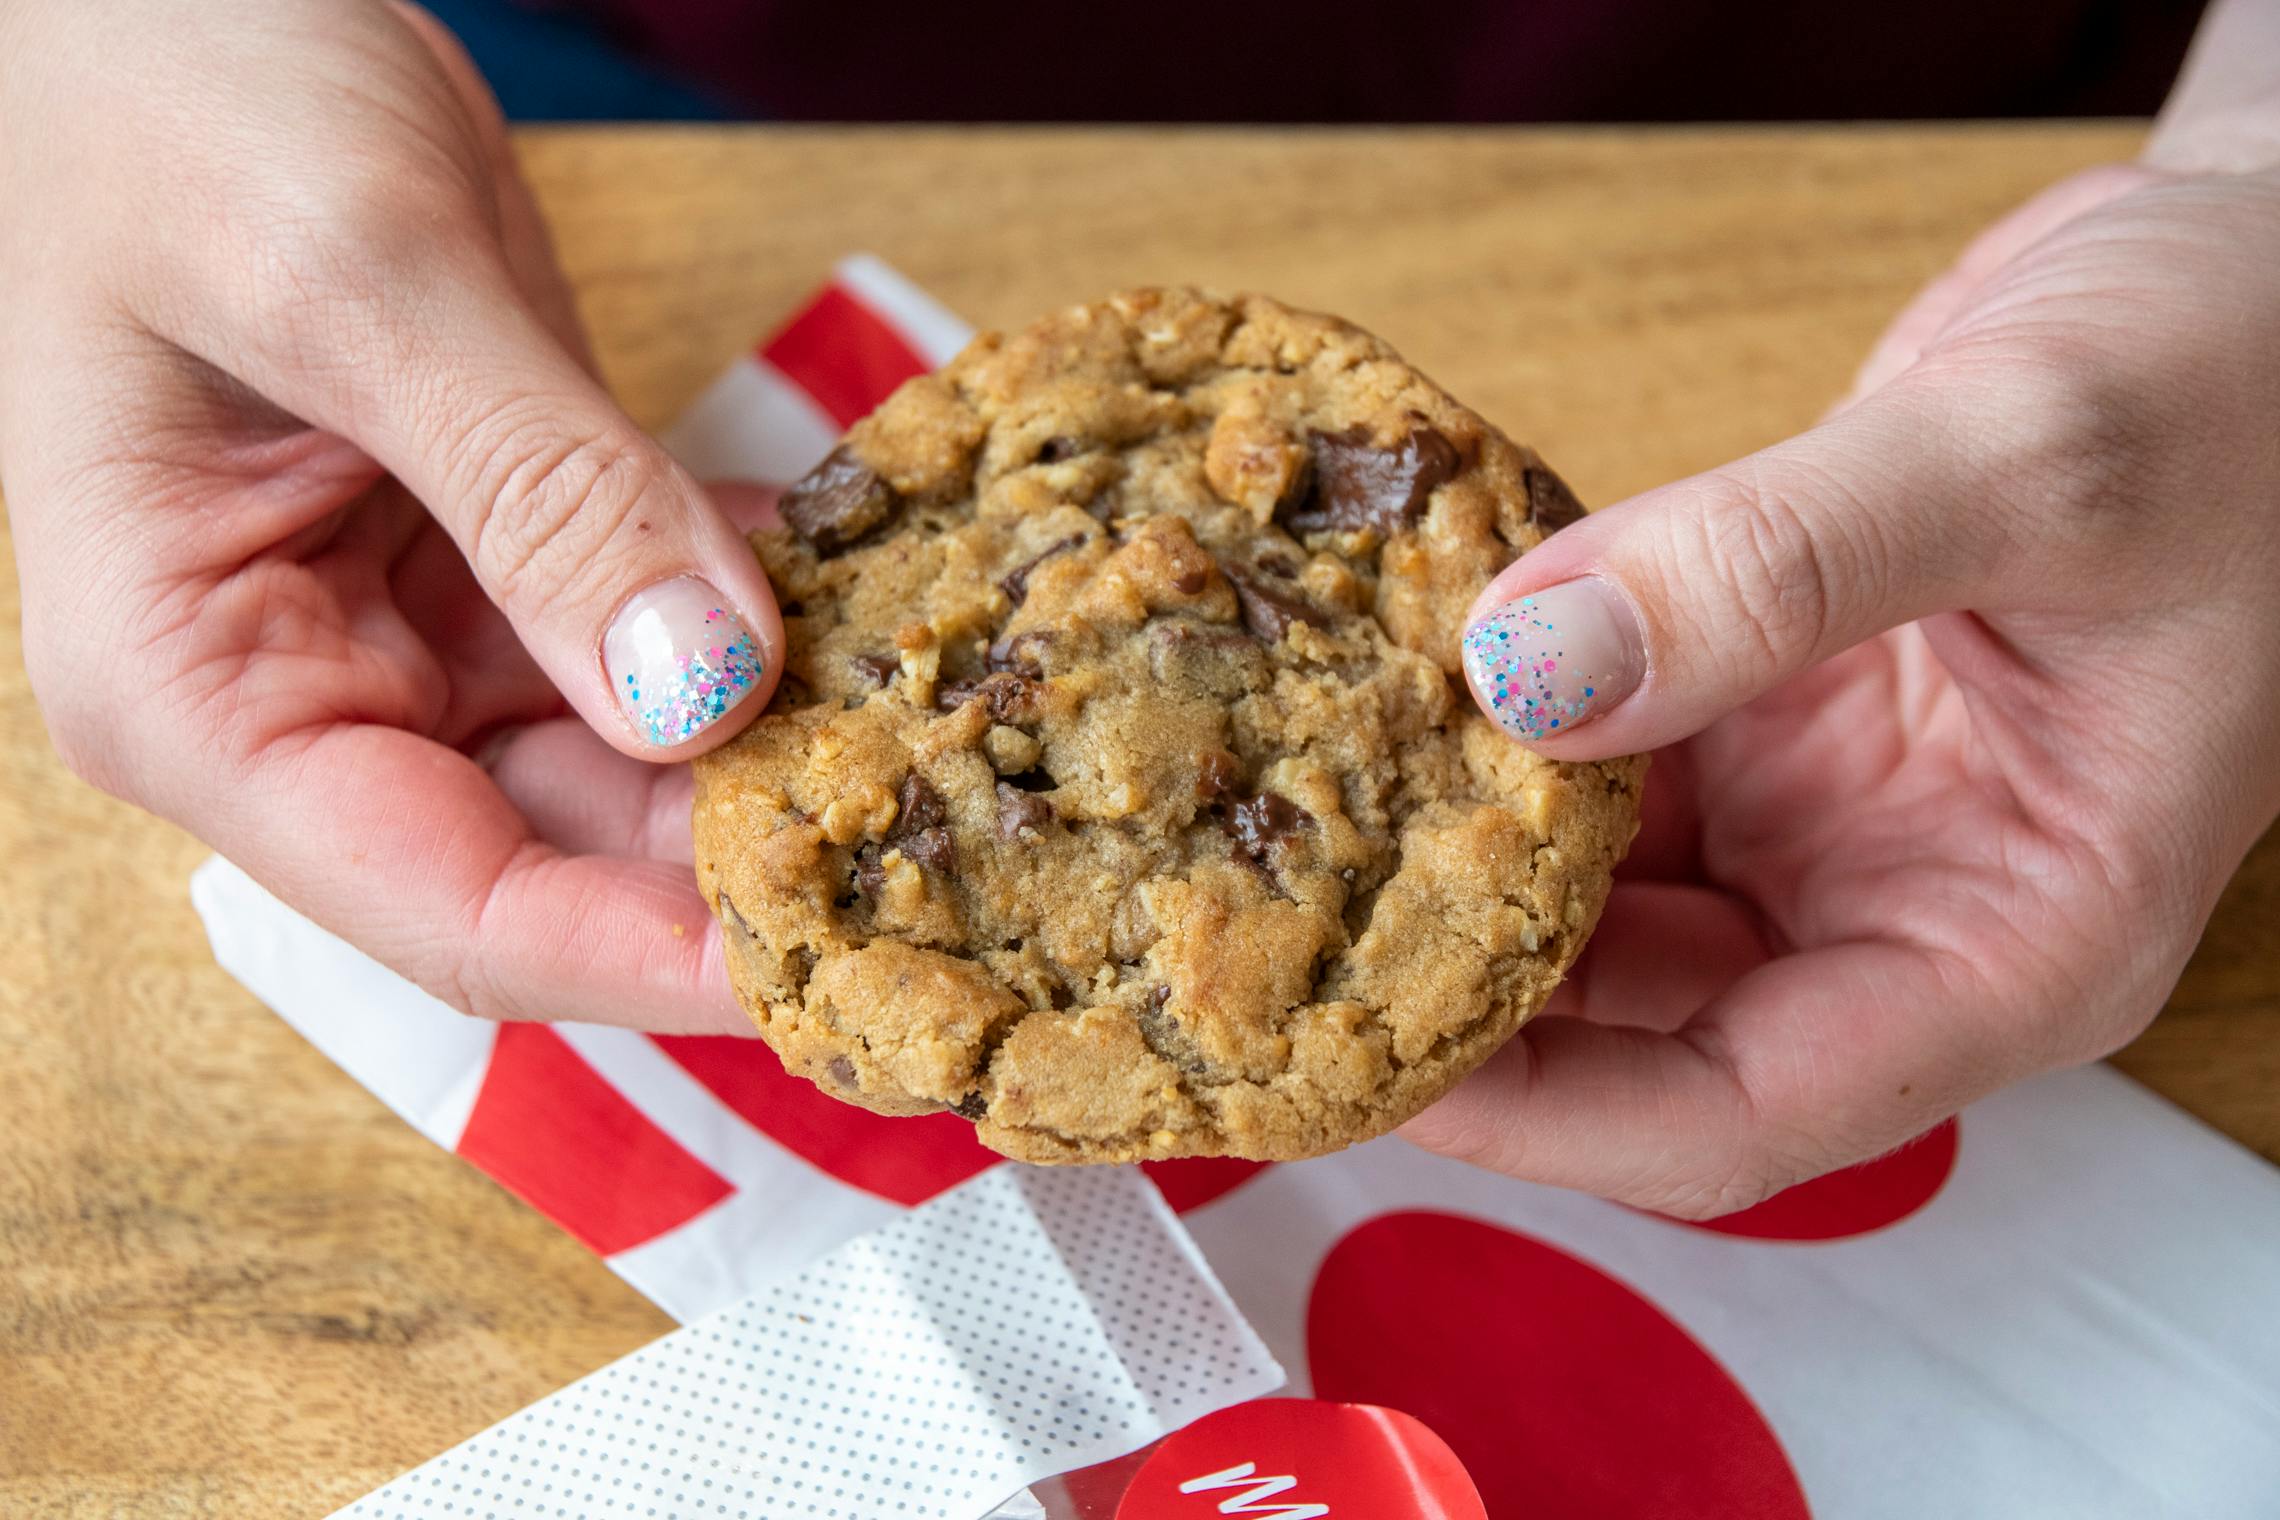 A person's hands holding a Chick-fil-A chocolate chunk cookie over a table.